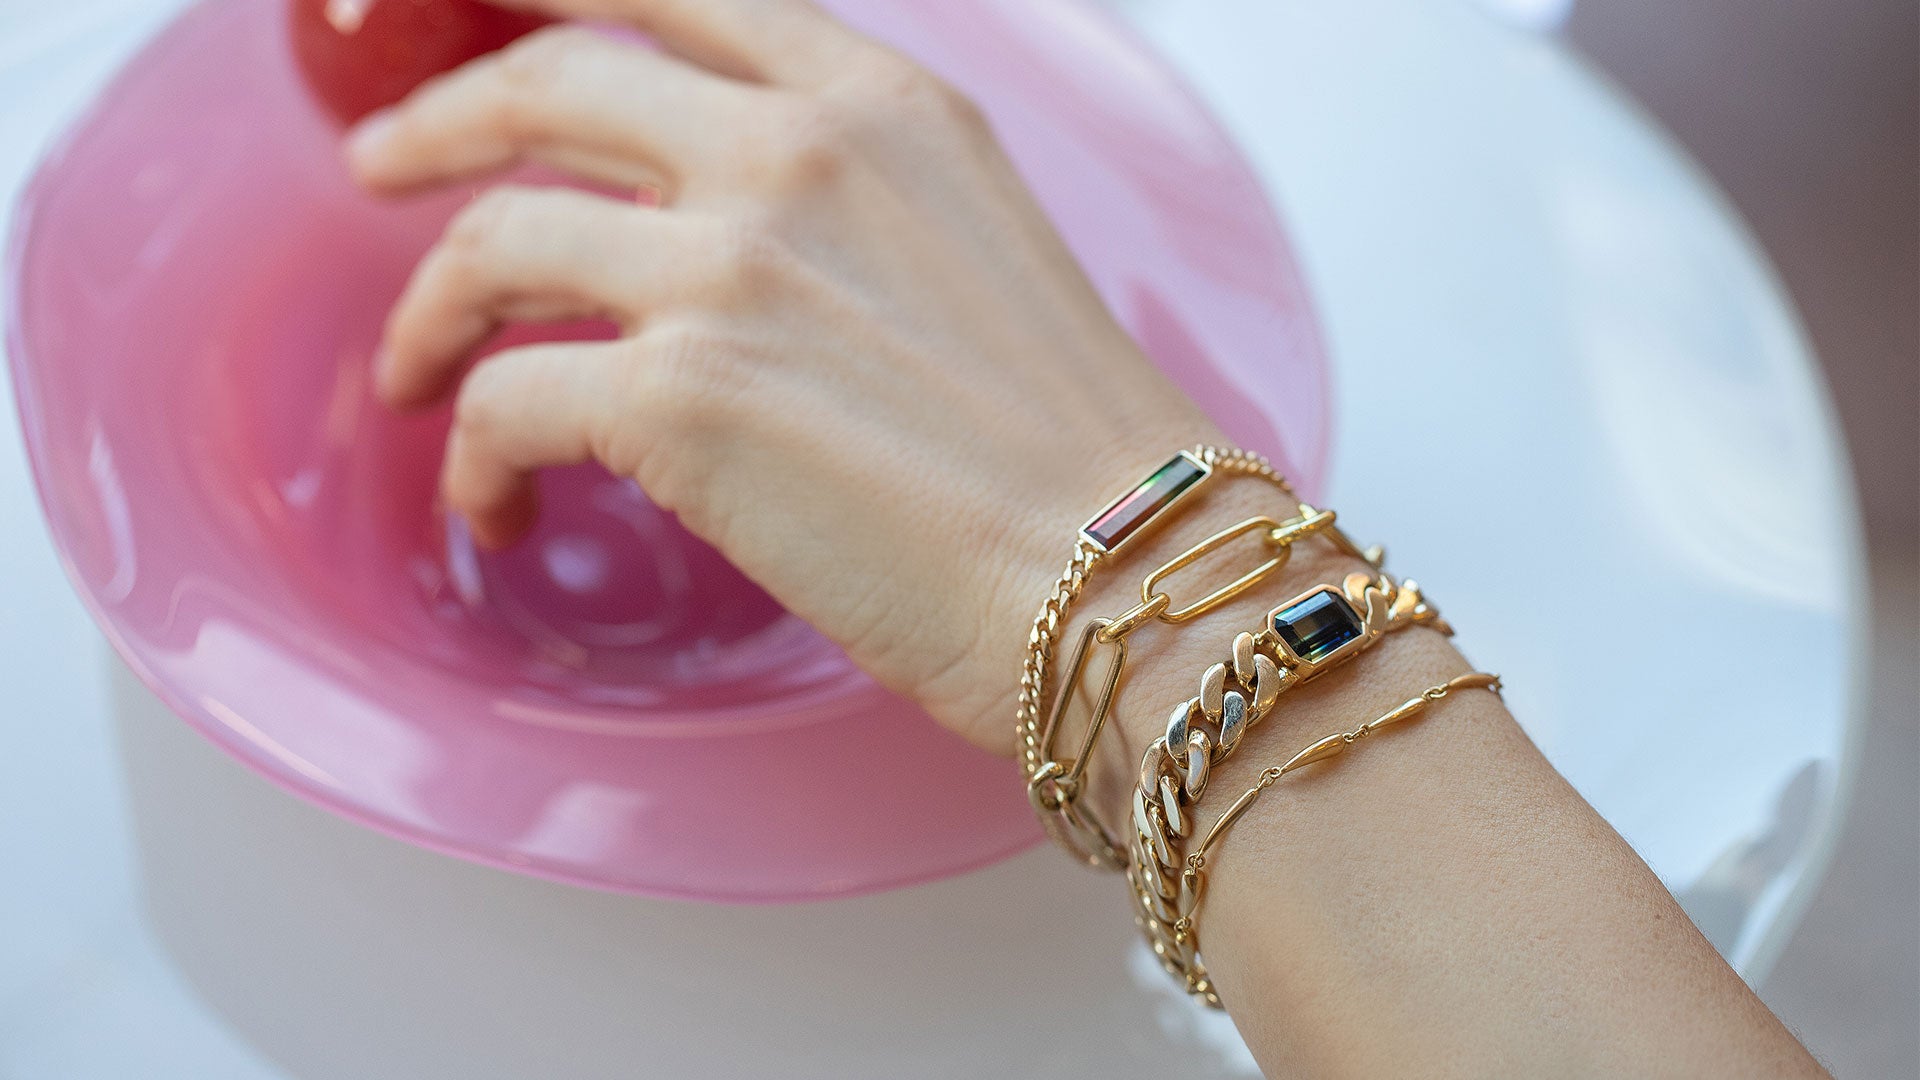 Editorial photo of model's hand and wrist wearing the Link Bracelet, Tenacity Bracelet, and Accumulation Bracelet.